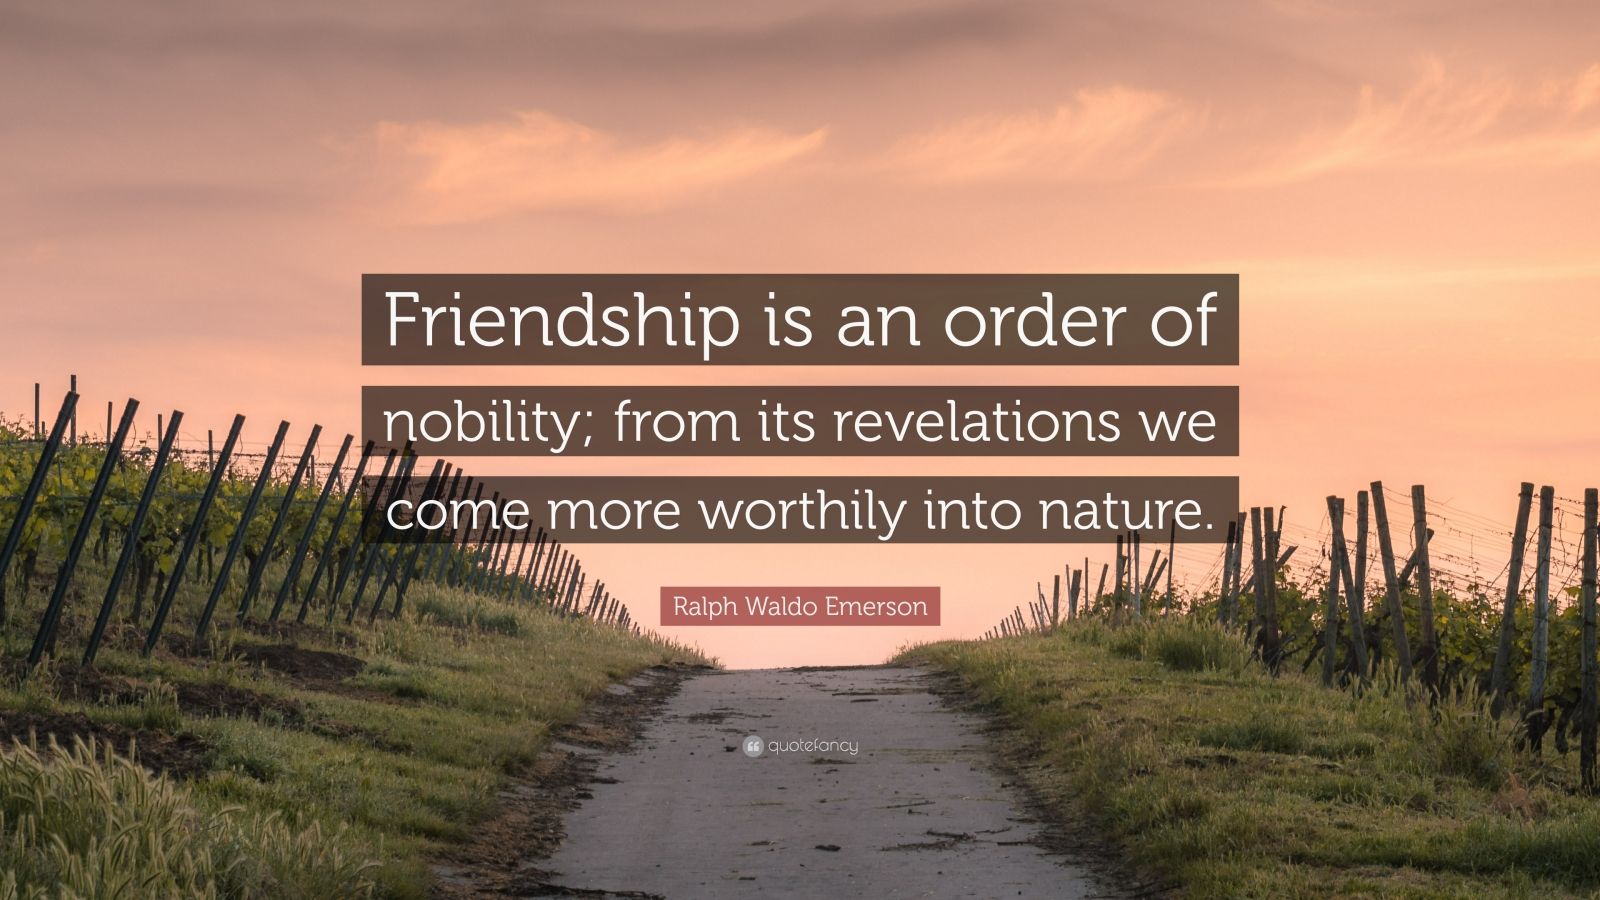 Ralph Waldo Emerson Quote: “Friendship is an order of nobility; from